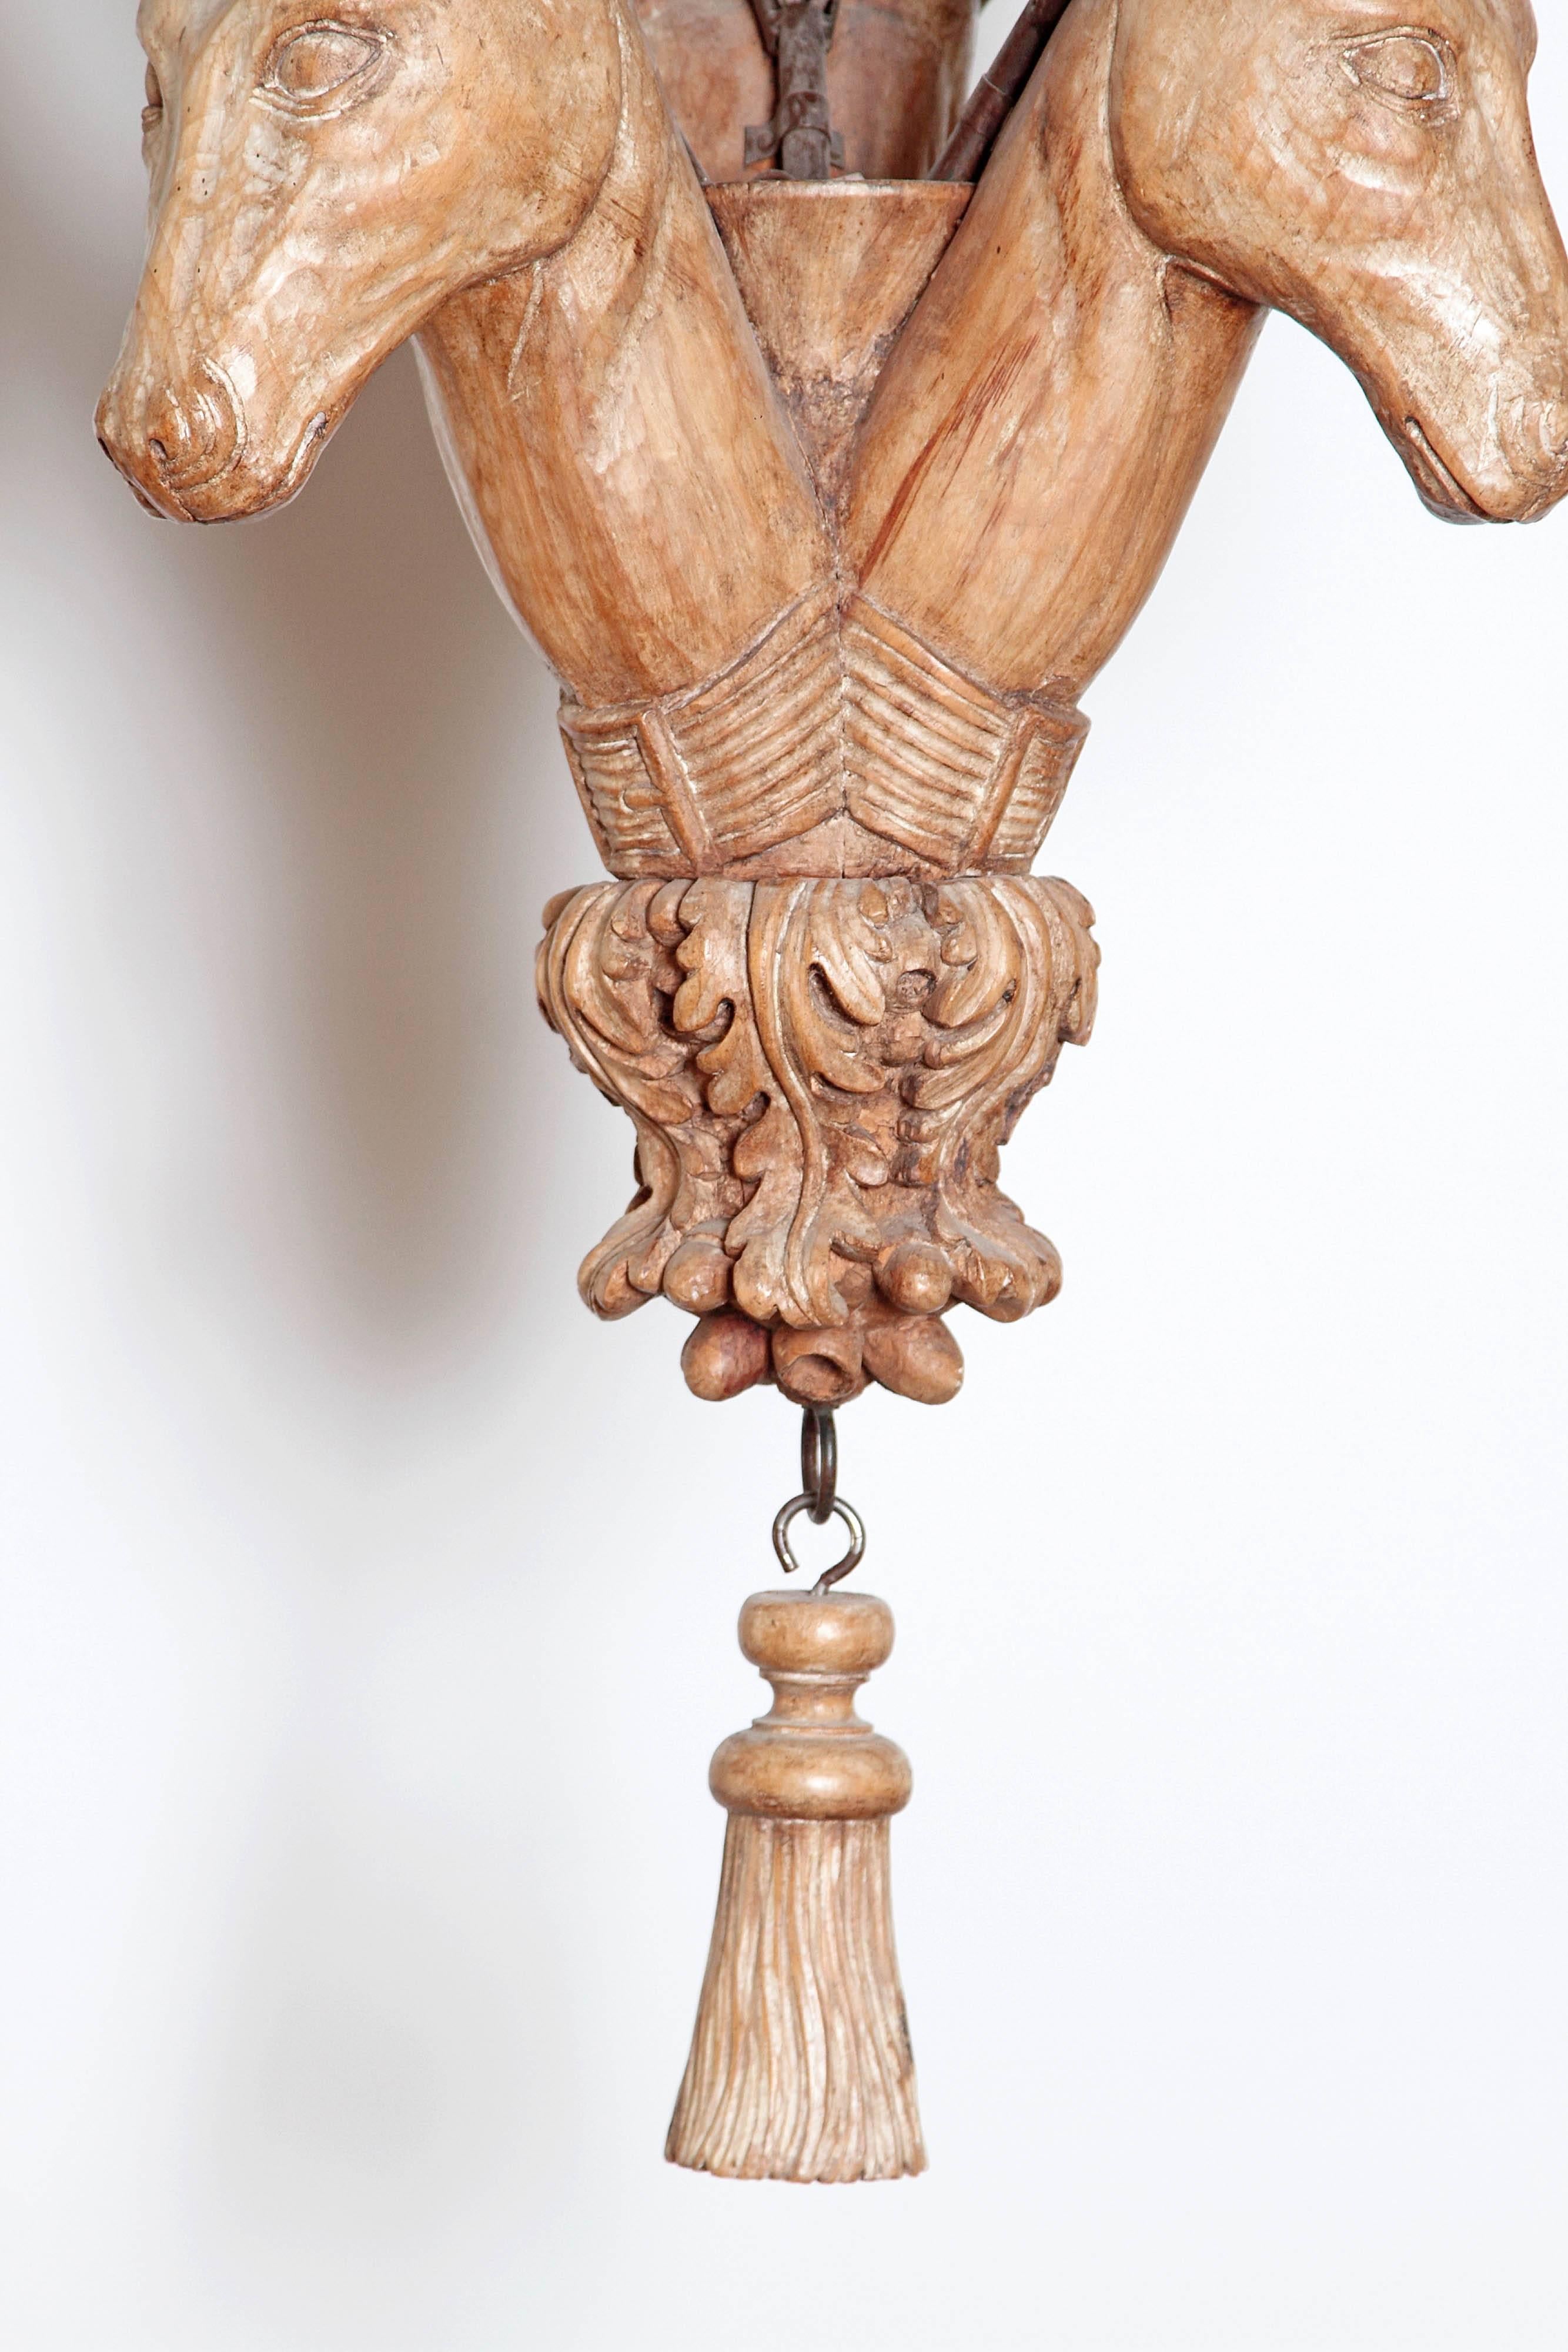 A large carved wooden chandelier with three deer heads with antlers holding the candle lights. A natural style in bleached wood with leaves at base, England, 20th century.